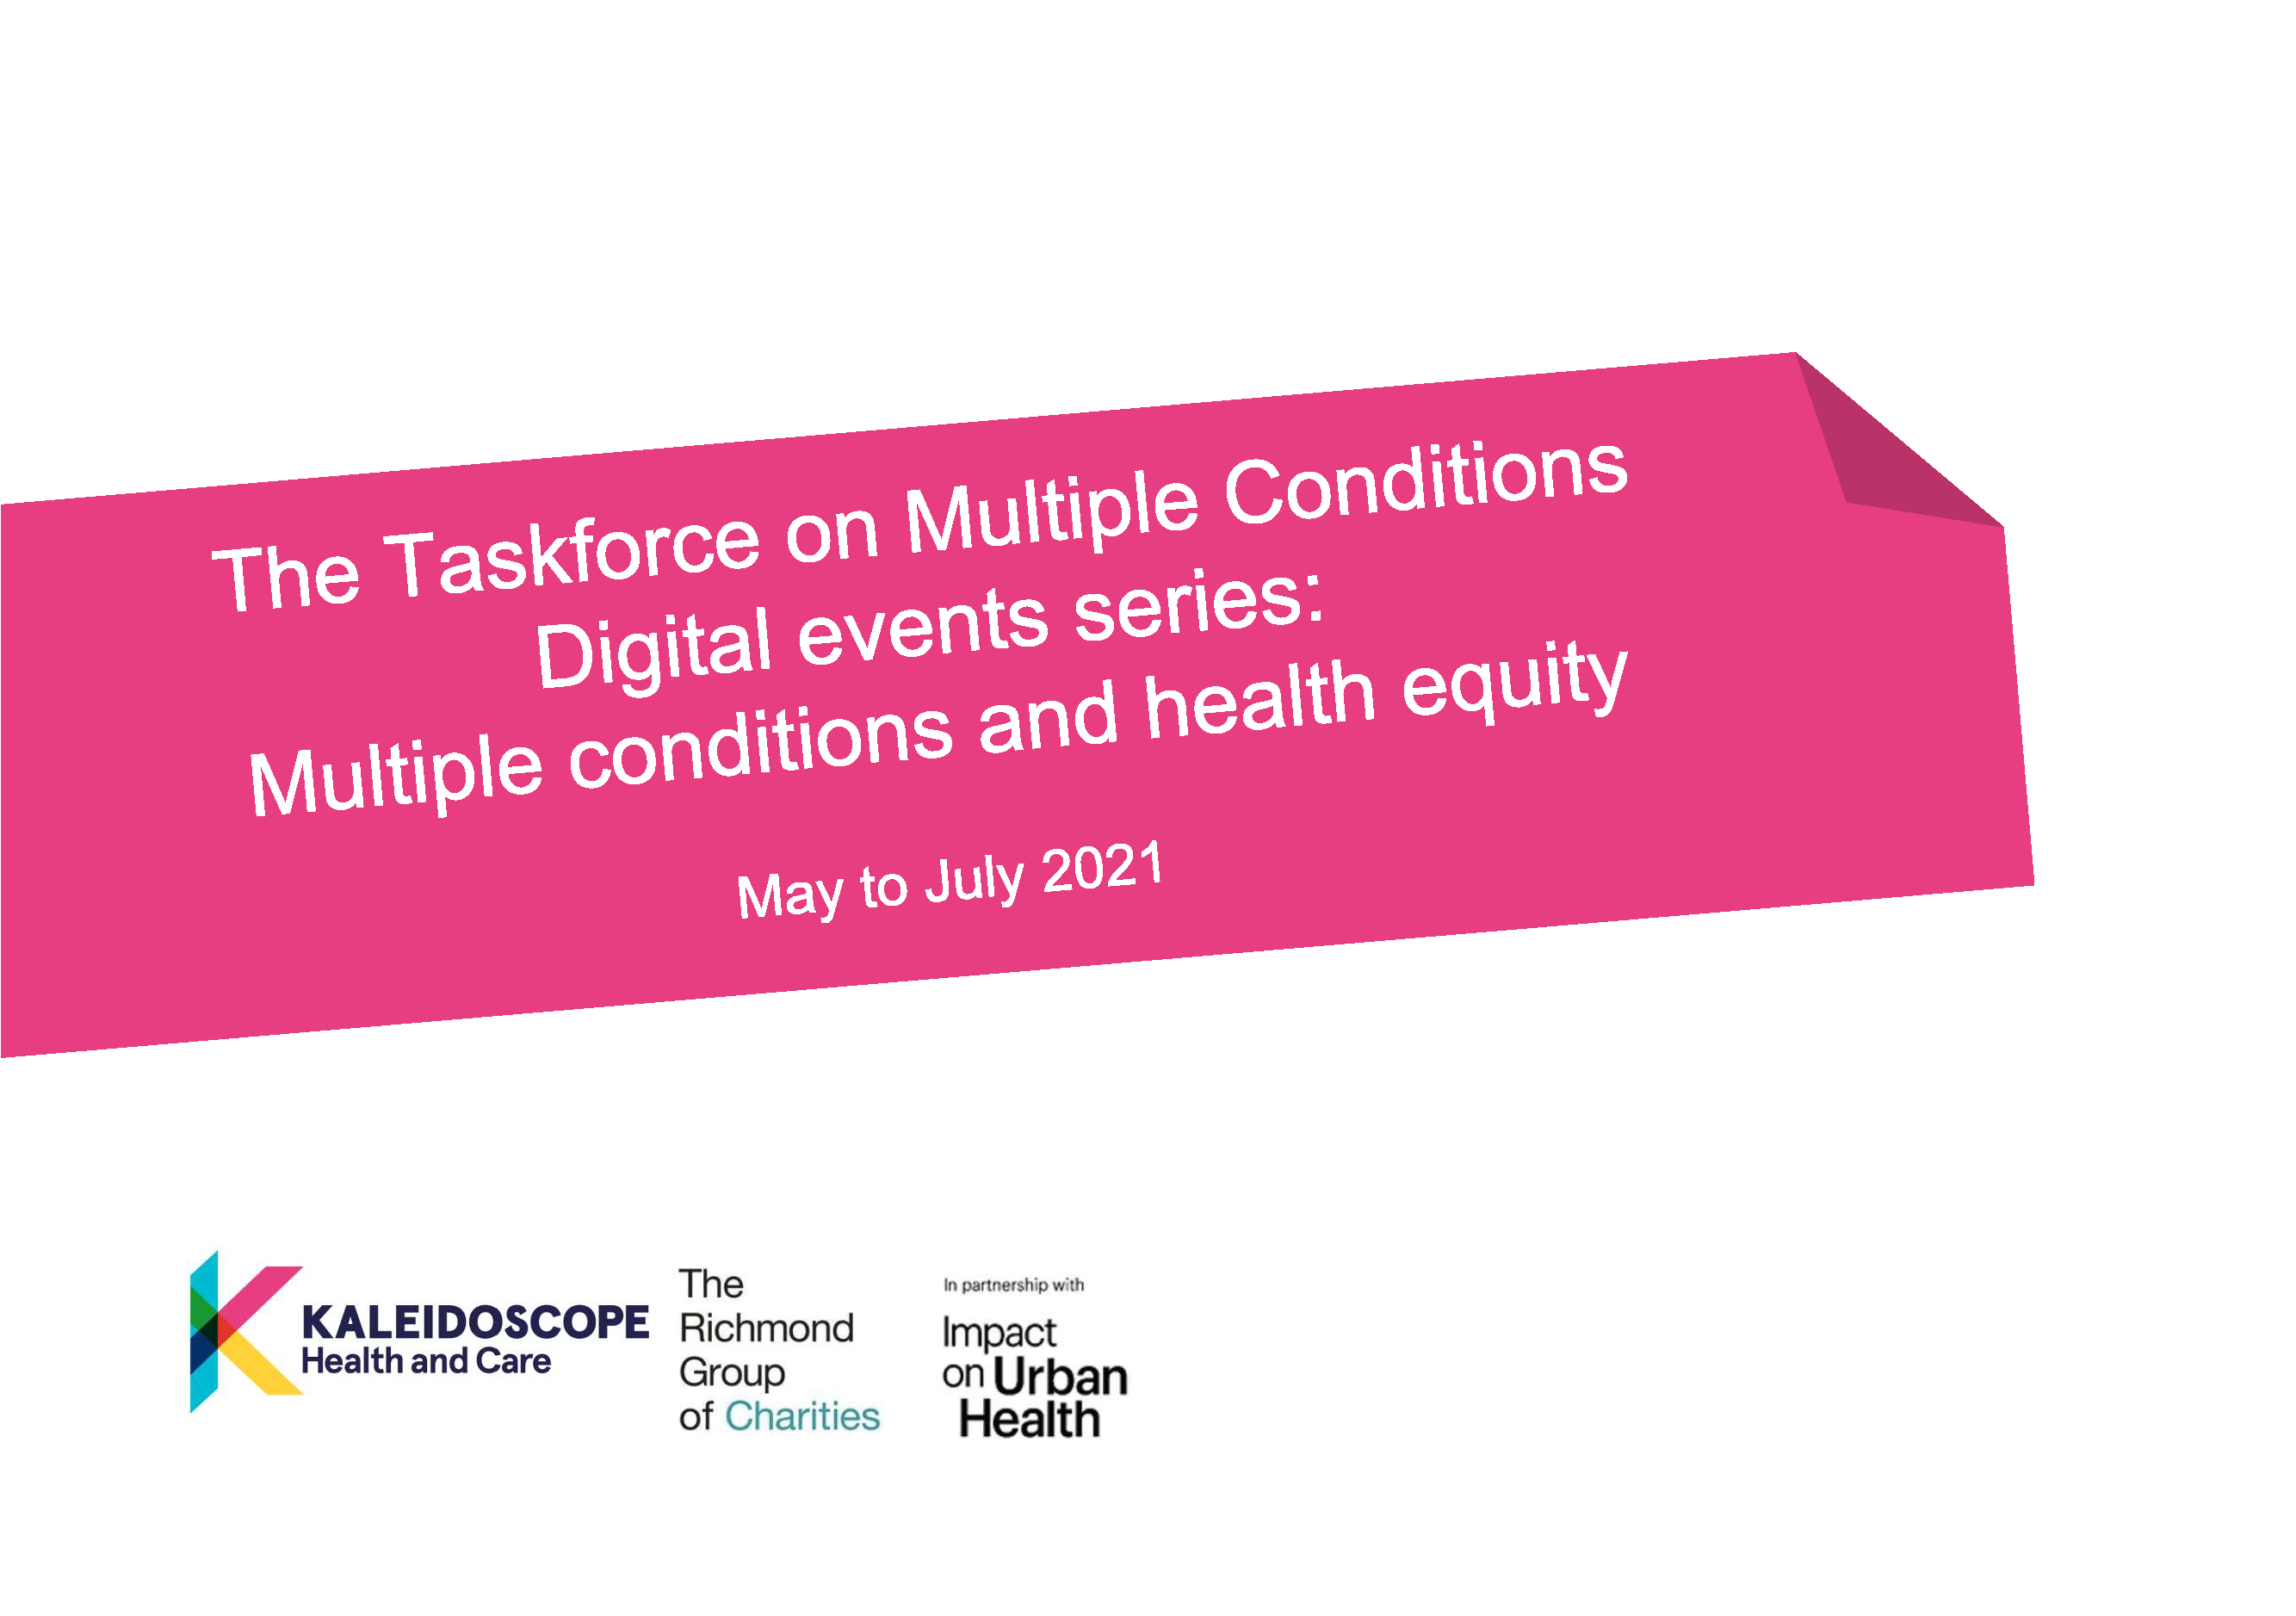 The Taskforce on Multiple Conditions Digital event series: Multiple conditions and health equity